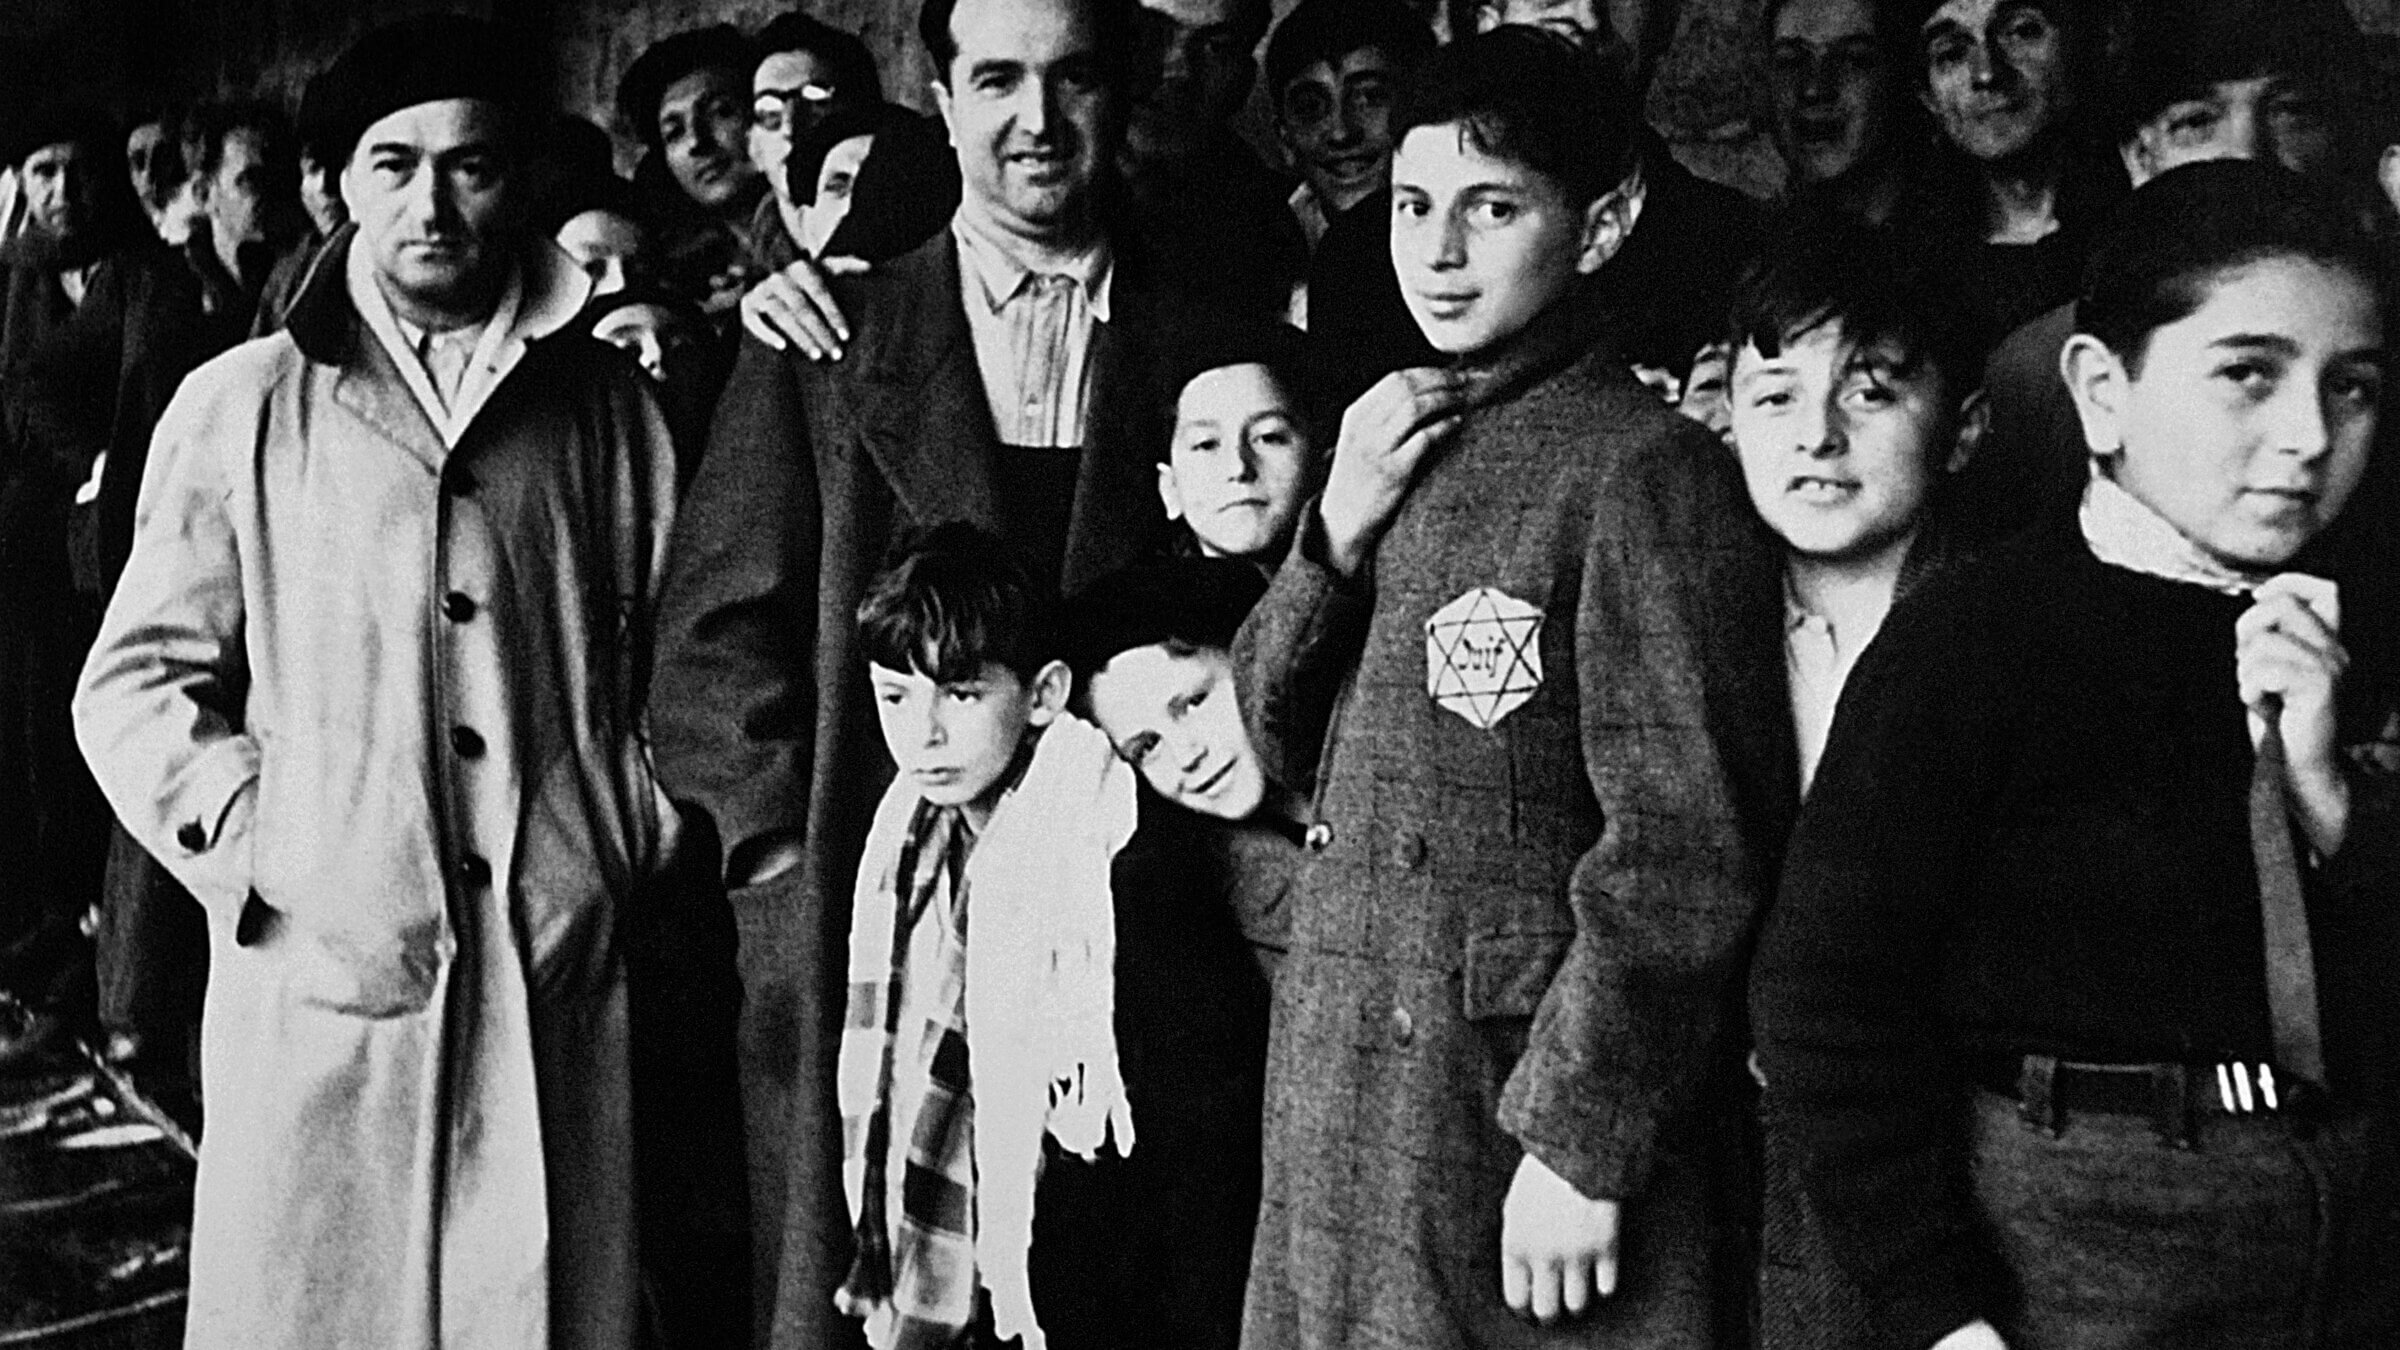 Jews in the Drancy transit camp in France, their last stop before the German concentration camps, in Jan. 1942.